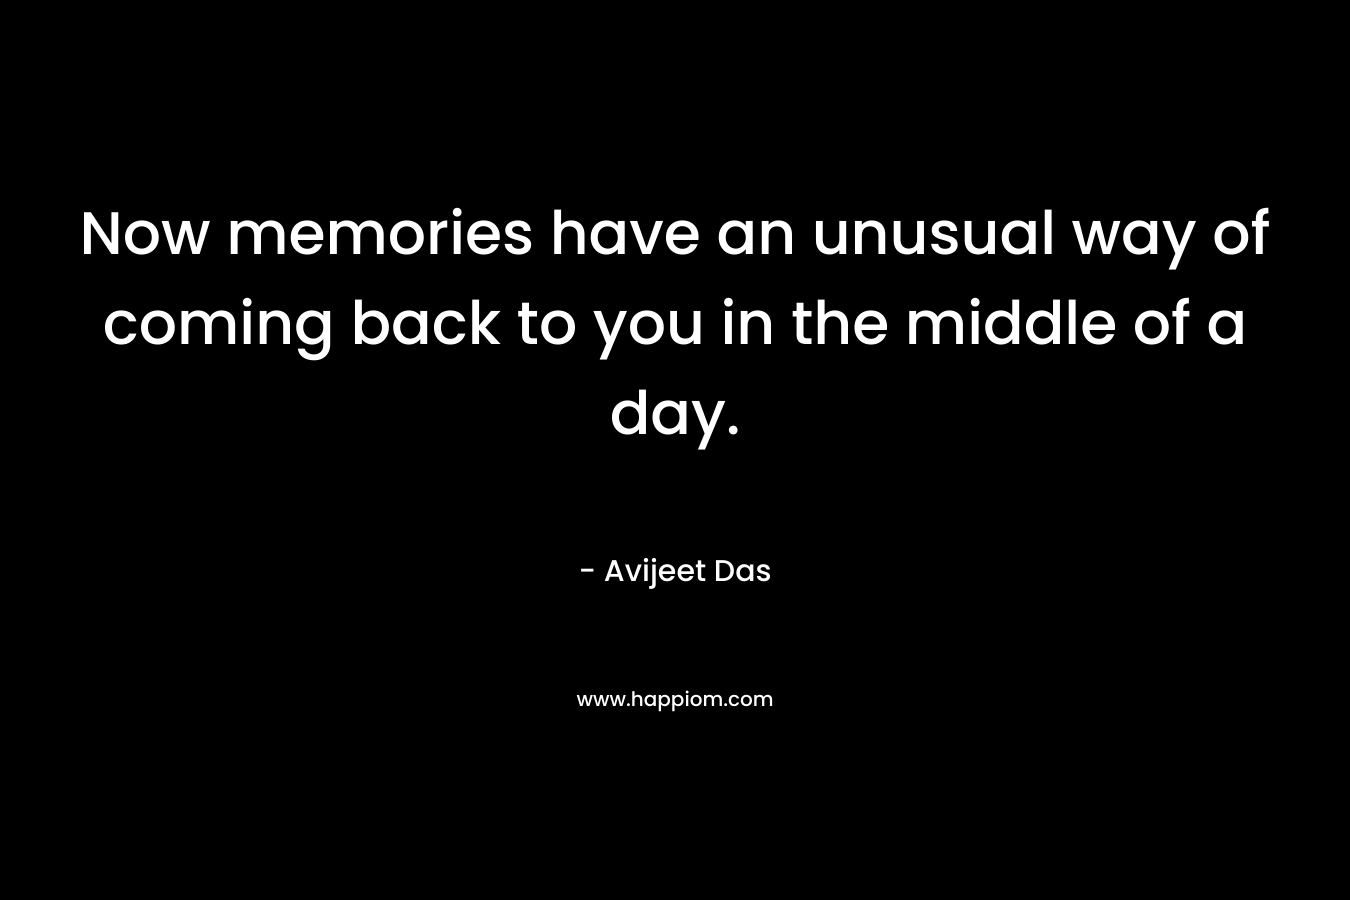 Now memories have an unusual way of coming back to you in the middle of a day. – Avijeet Das